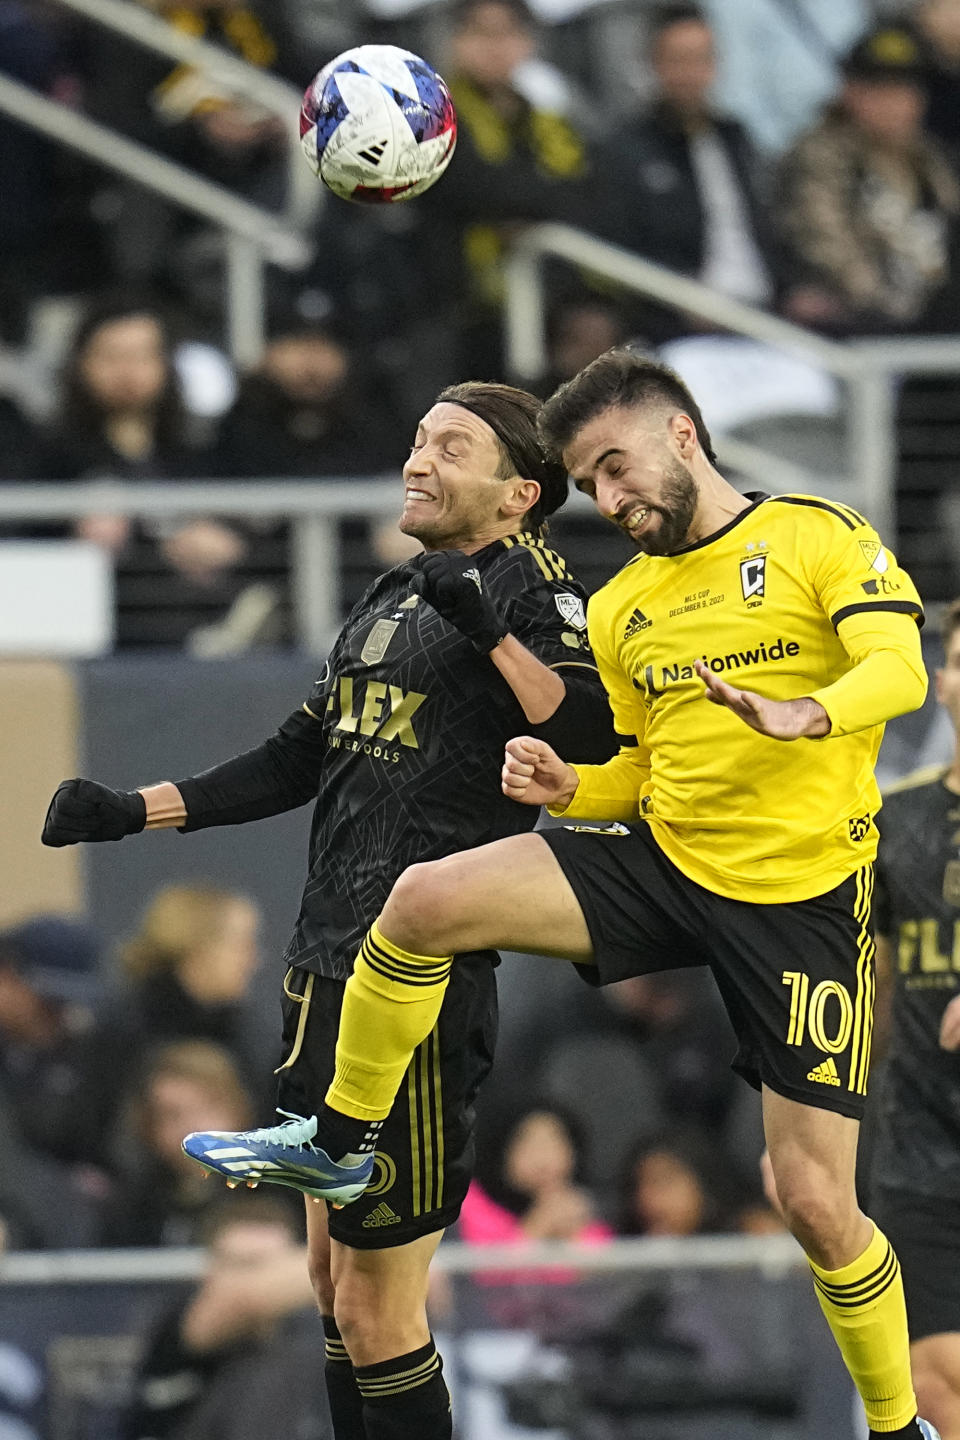 RETRANSMITTING TO CORRECT TEAM TO LOS ANGELES FC - Los Angeles FC's Ilie Sanchez, left, and Columbus Crew's Diego Rossi (10) jump up to head the ball in the first half of the MLS soccer championship match, Saturday, Dec. 9, 2023, in Columbus, Ohio. (AP Photo/Sue Ogrocki)